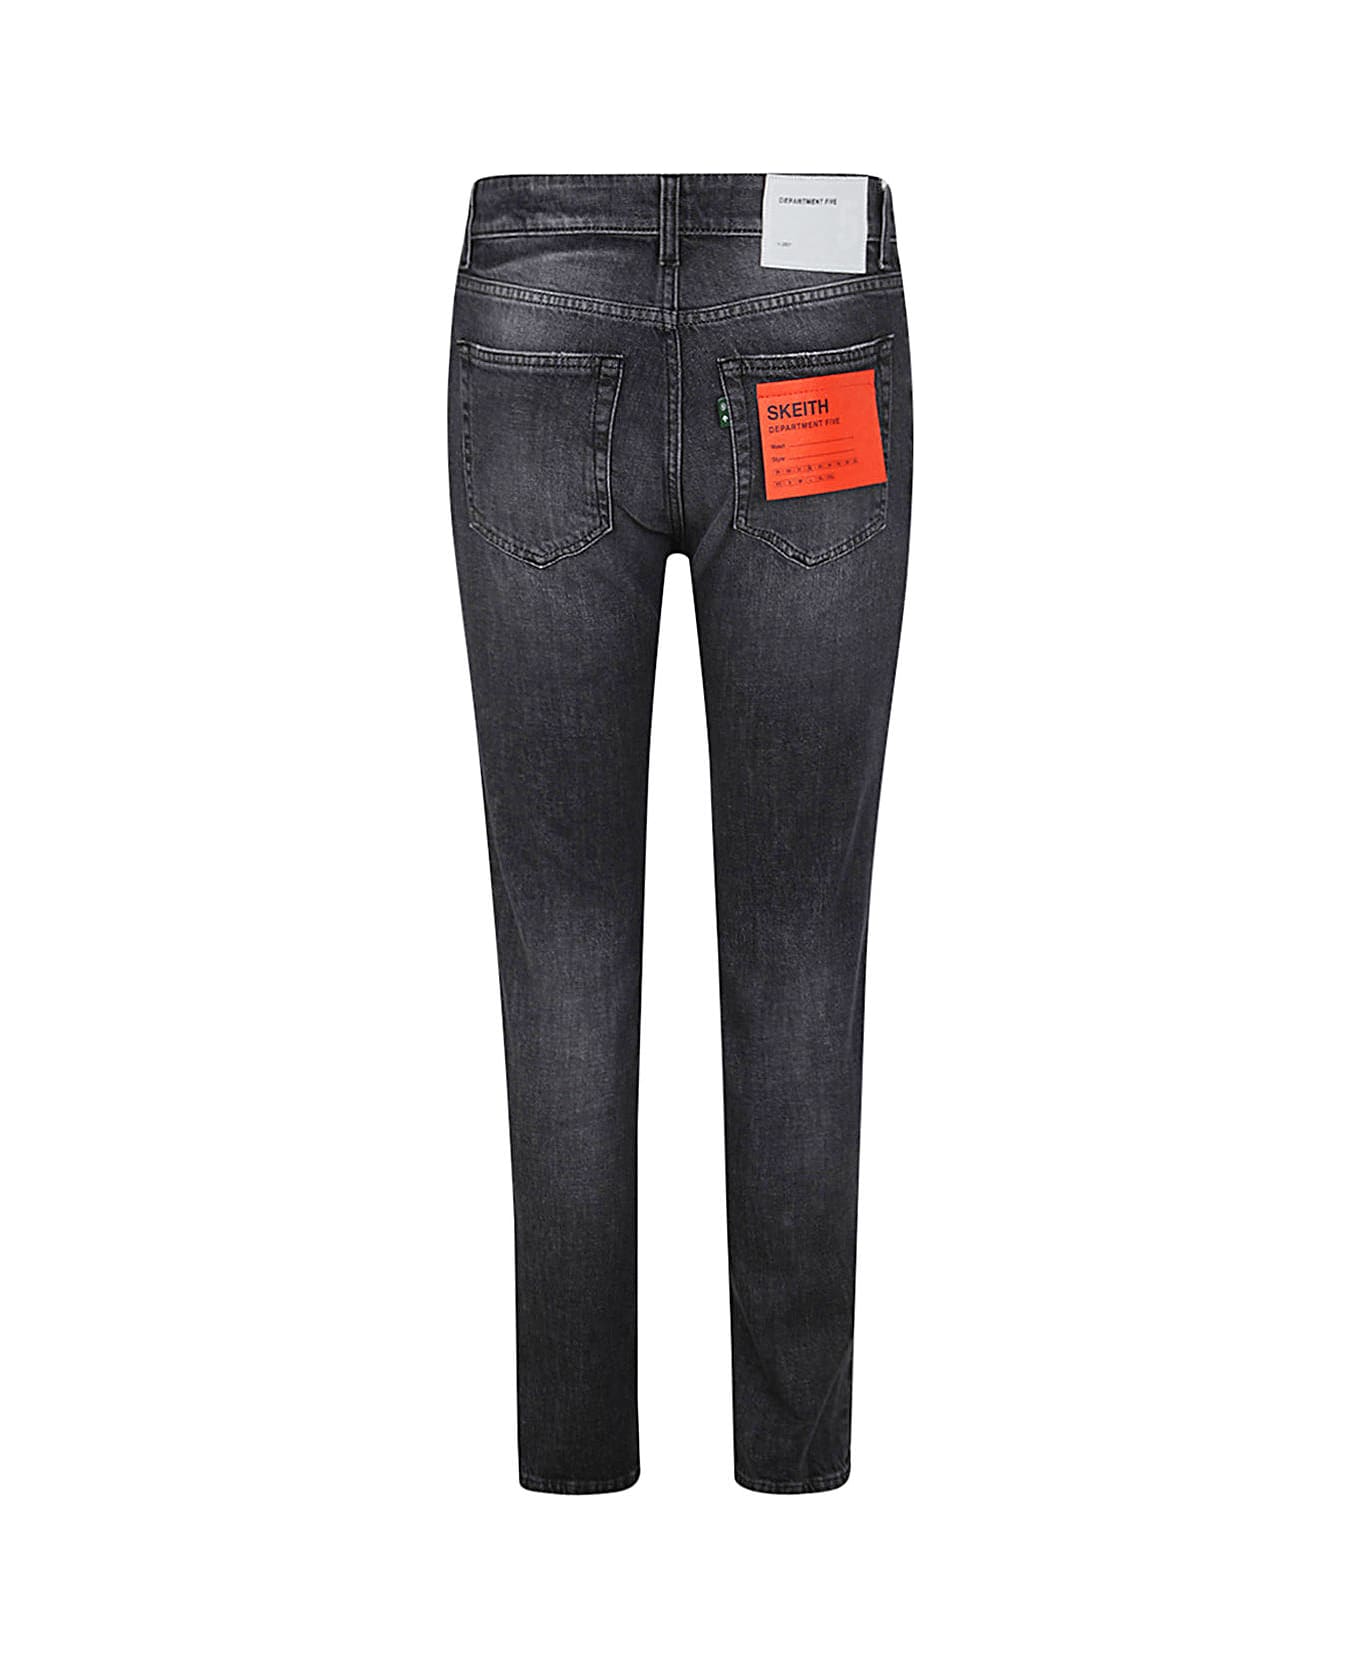 Department Five Skeith Jeans - Black